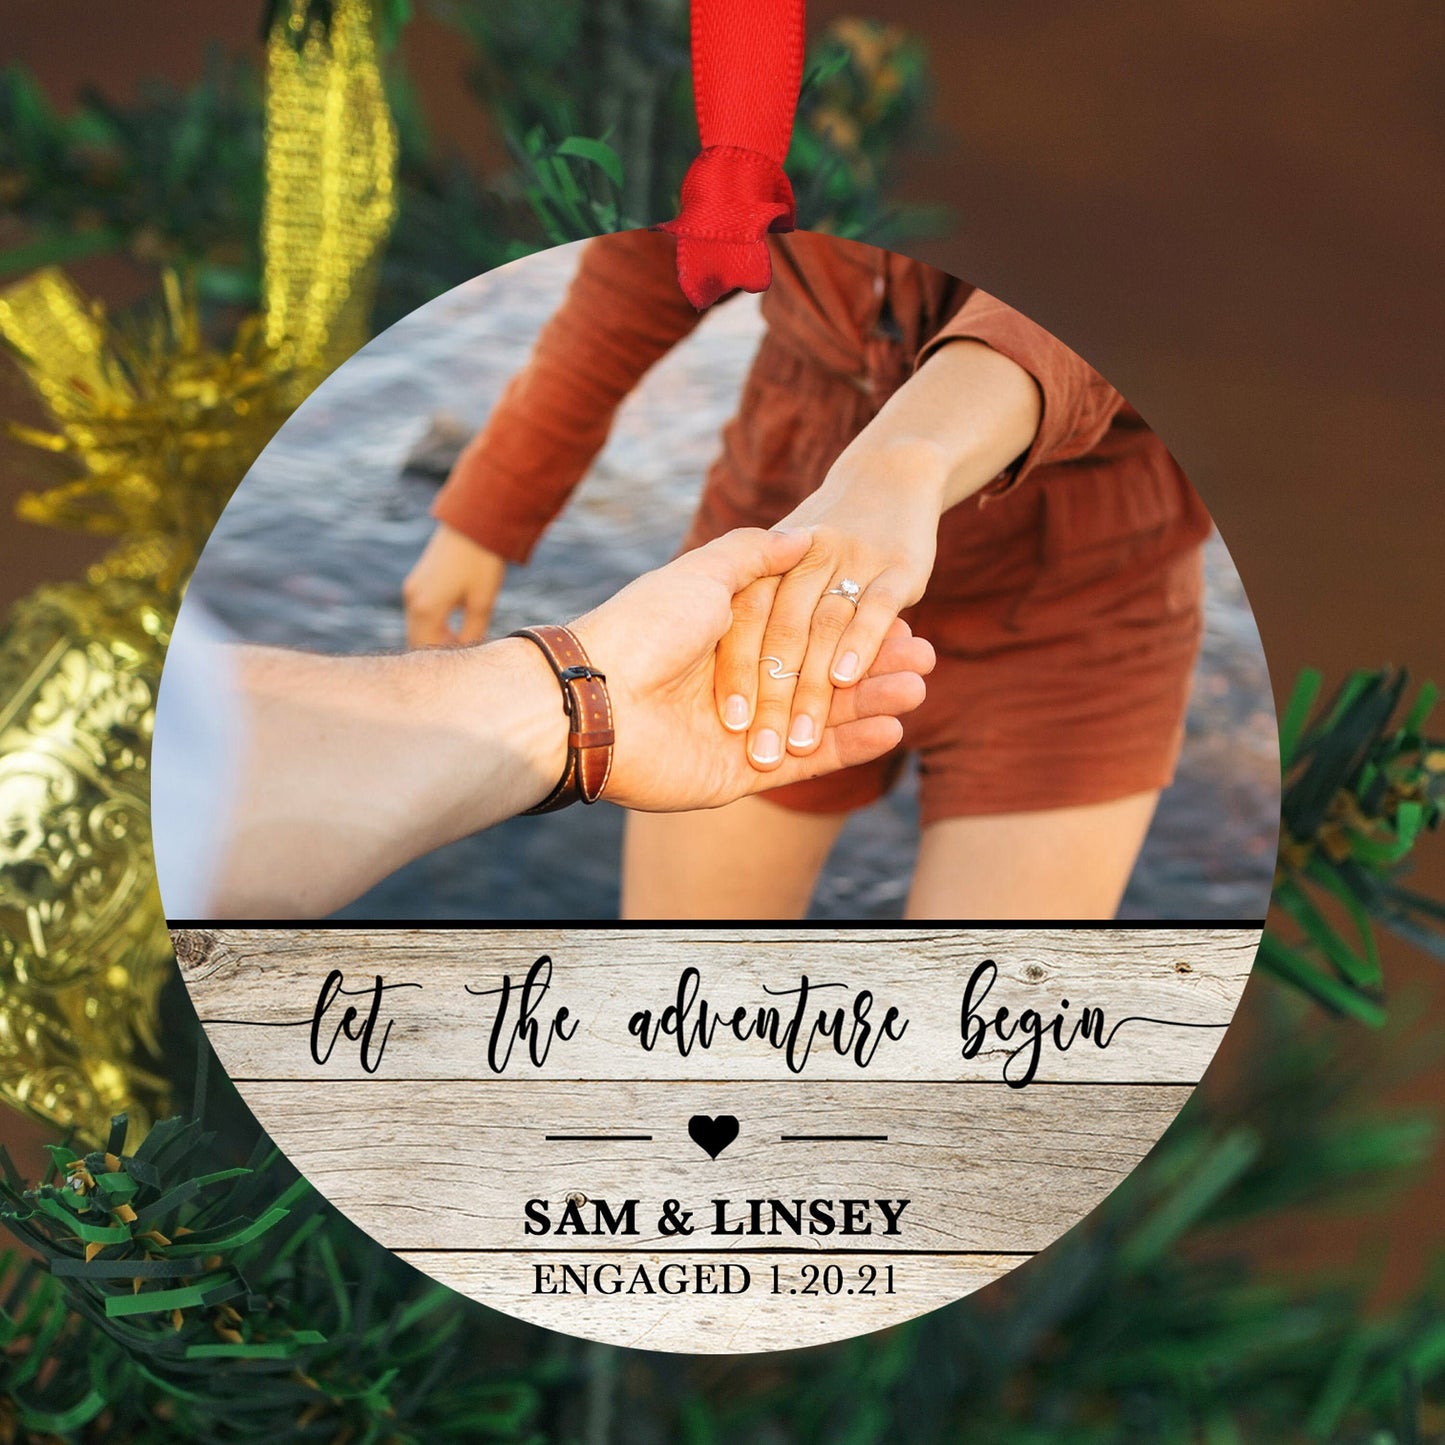 Personalized Engagement Ornament - Engagement Party Gift - 4" x 6" Wood Ornament -Let The Adventure Begin Custom, Engagement Gift with Names